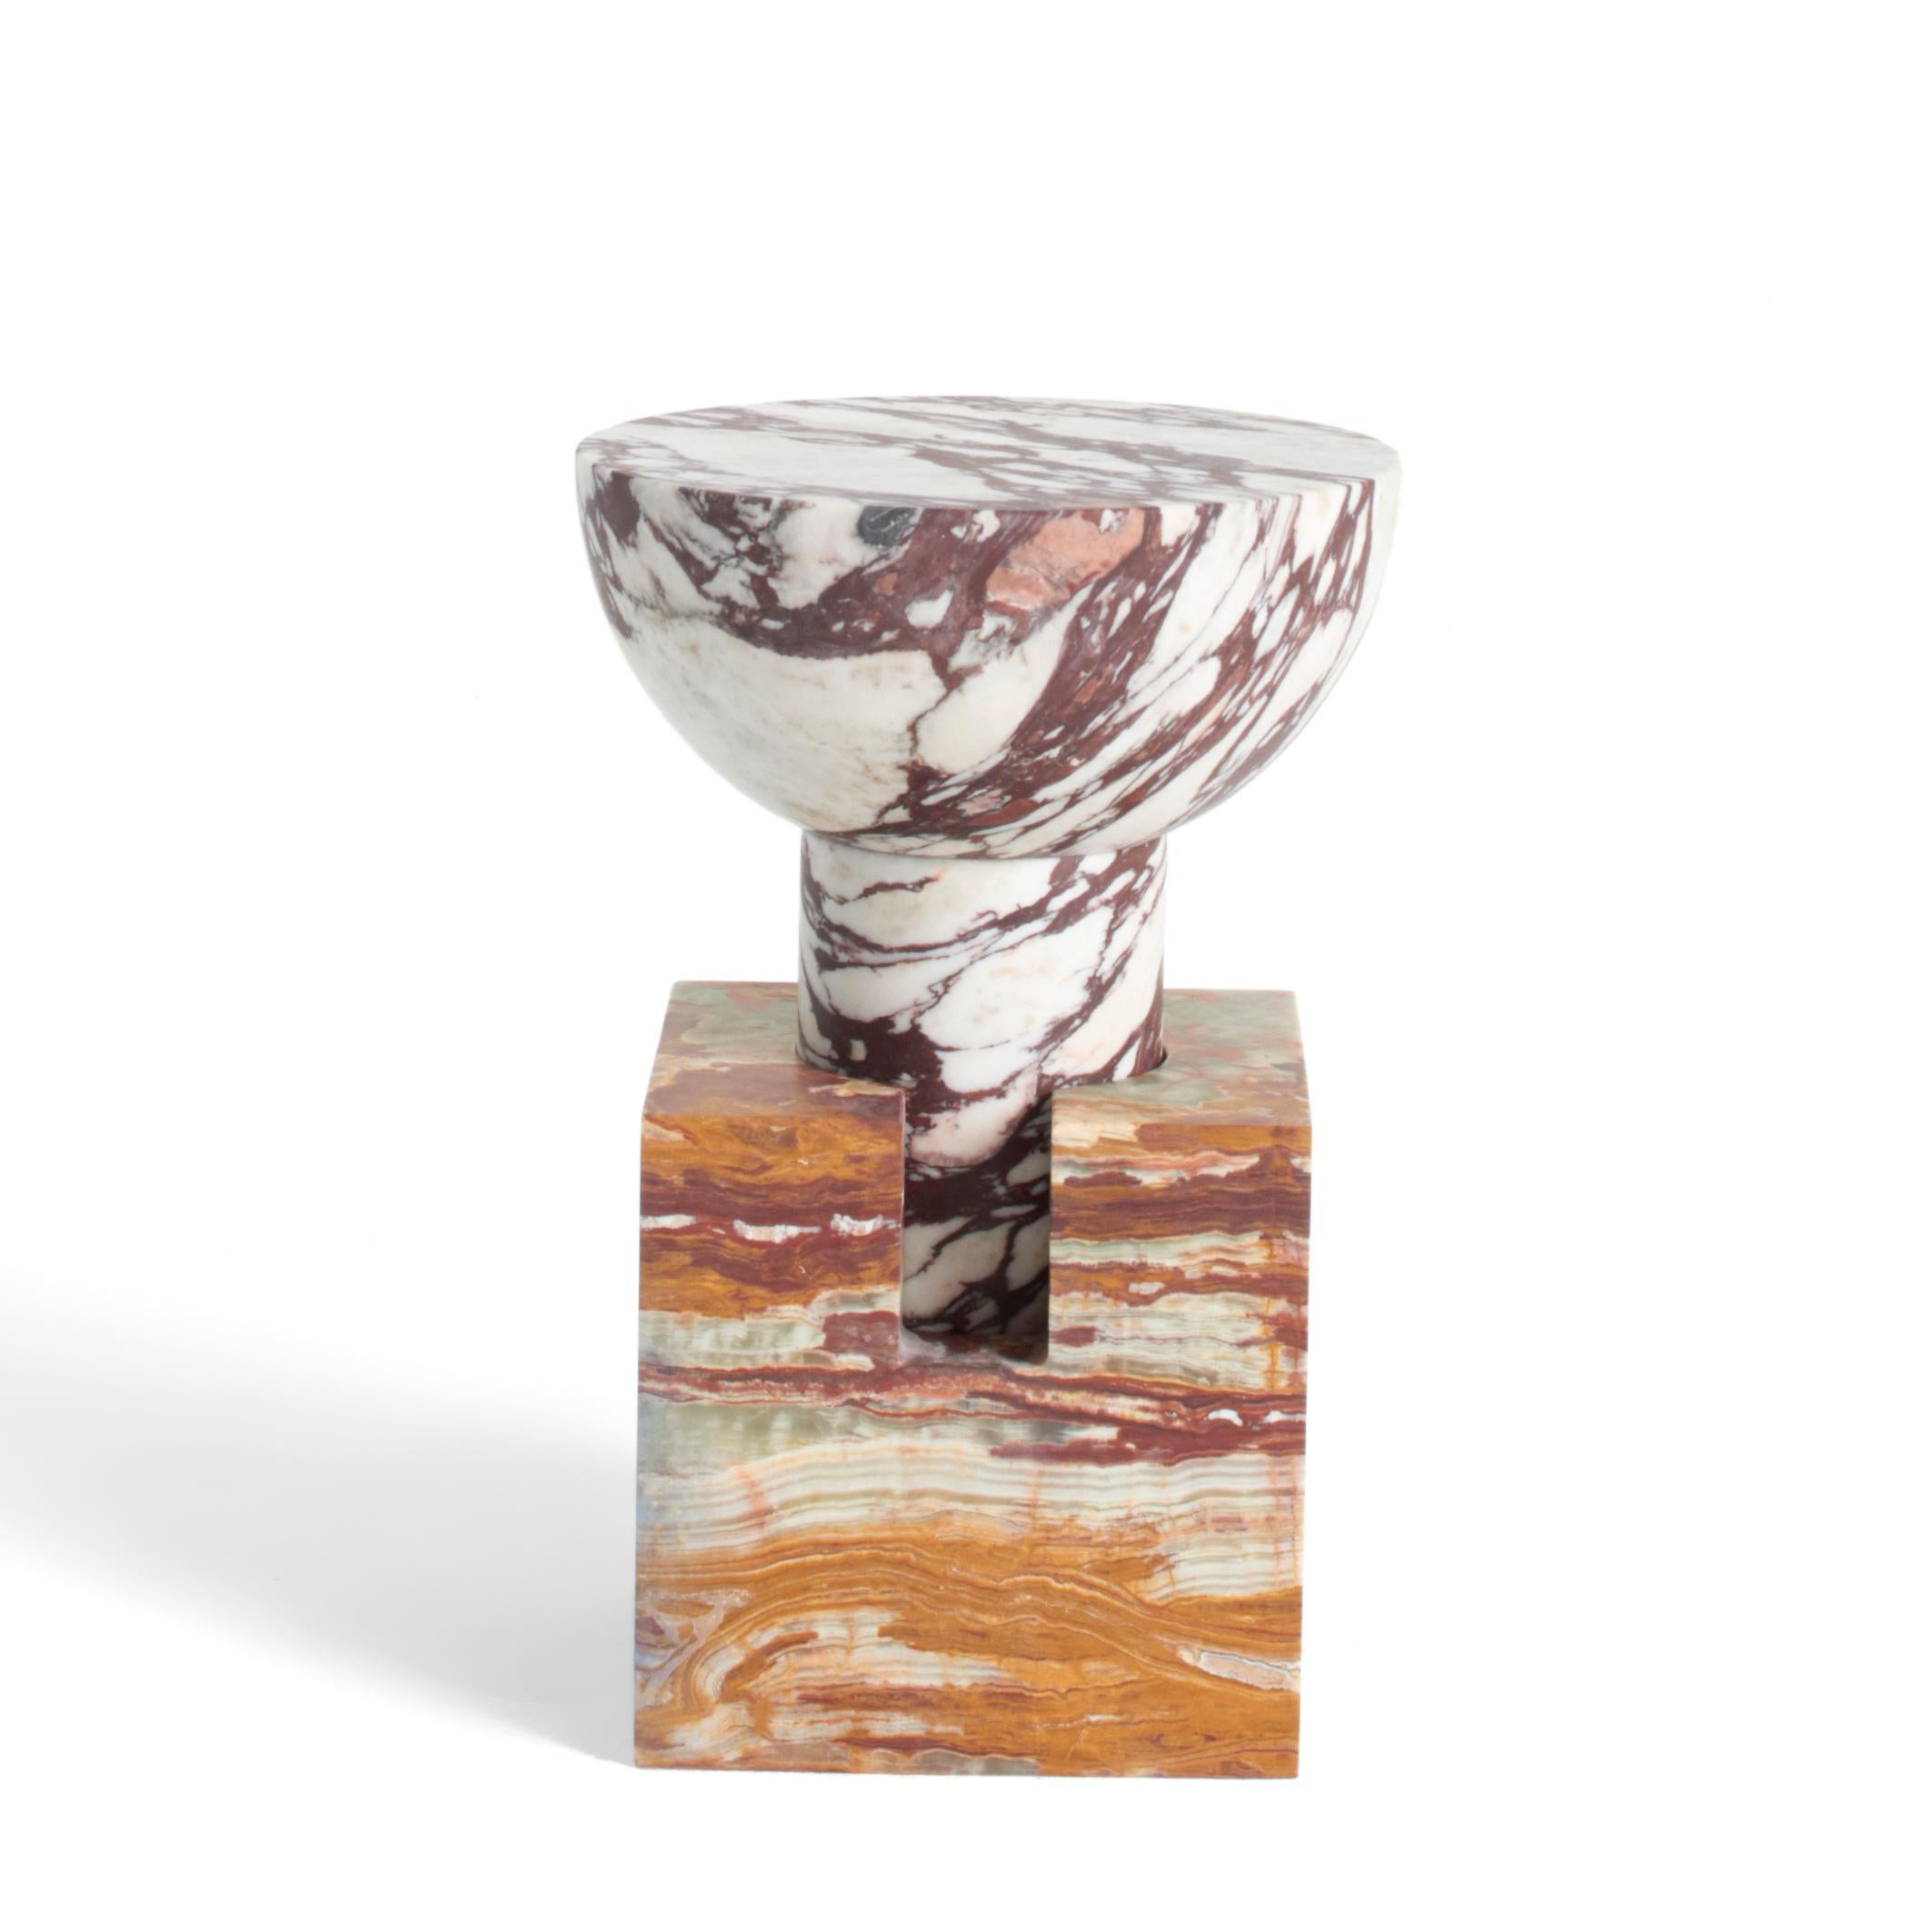 Onyx Block Side Table by Anna Karlin
Dimensions: ? 30.4 x 23.5 x 45.7 cm
Materials: Marble

Born in London, Anna attended Central St. Martins School and Glasgow School of Art. Trained in visual communication, she is a self-taught product